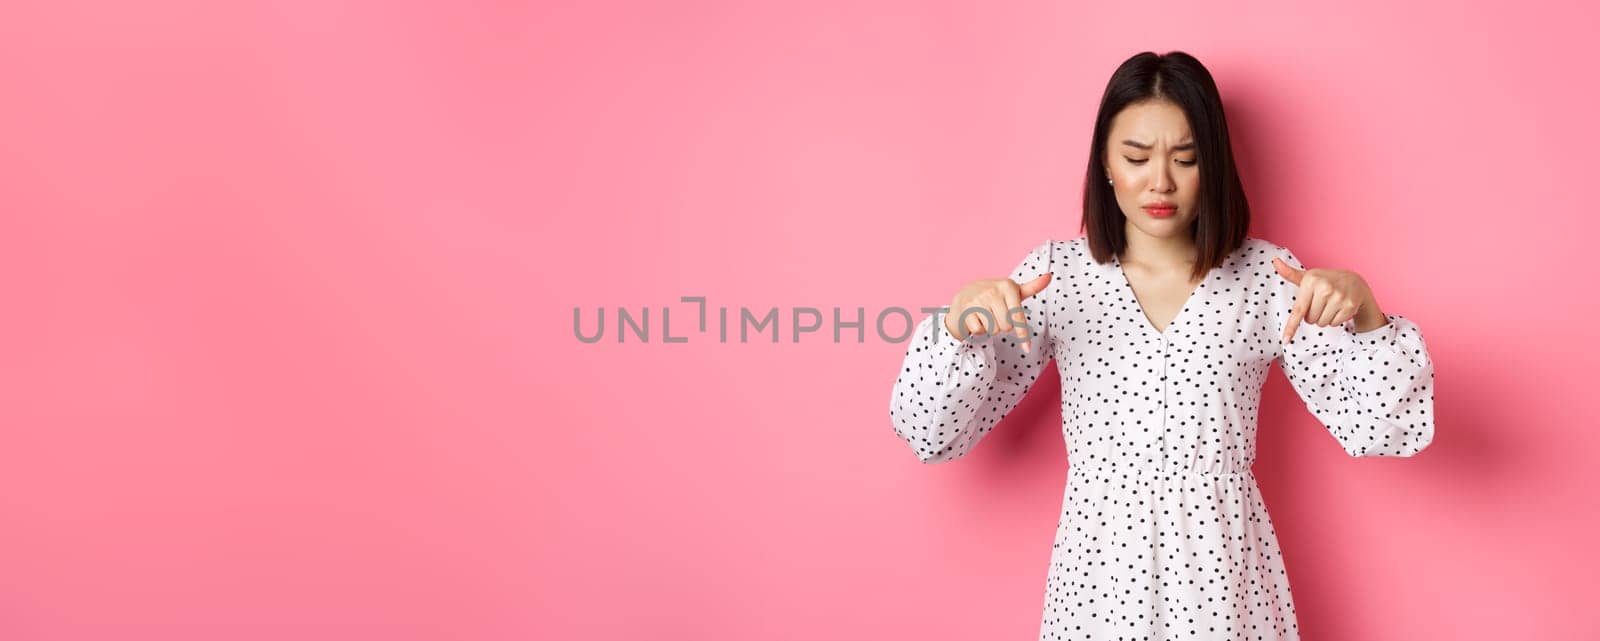 Concerned asian woman peeking down and pointing hand at disturbing banner, frowning upset, standing over pink background.